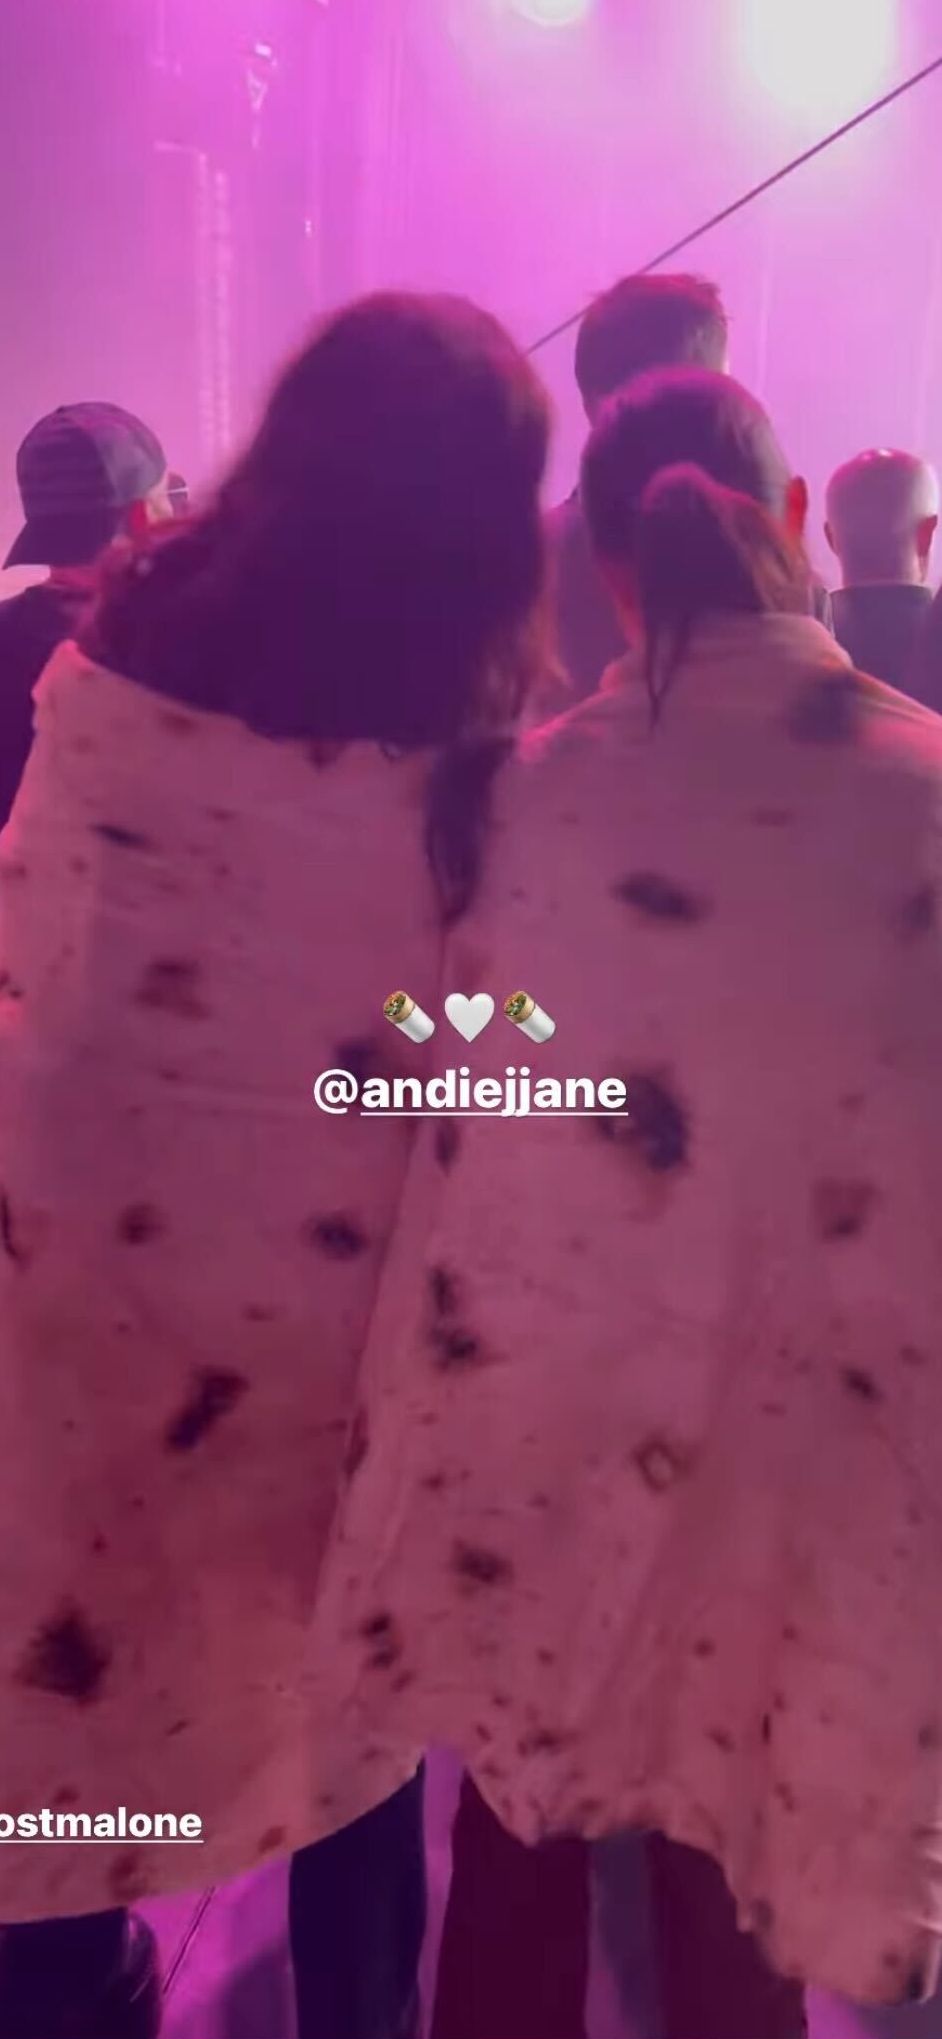 Nicola shared a video wearing a tortilla blanket watching Post Malone